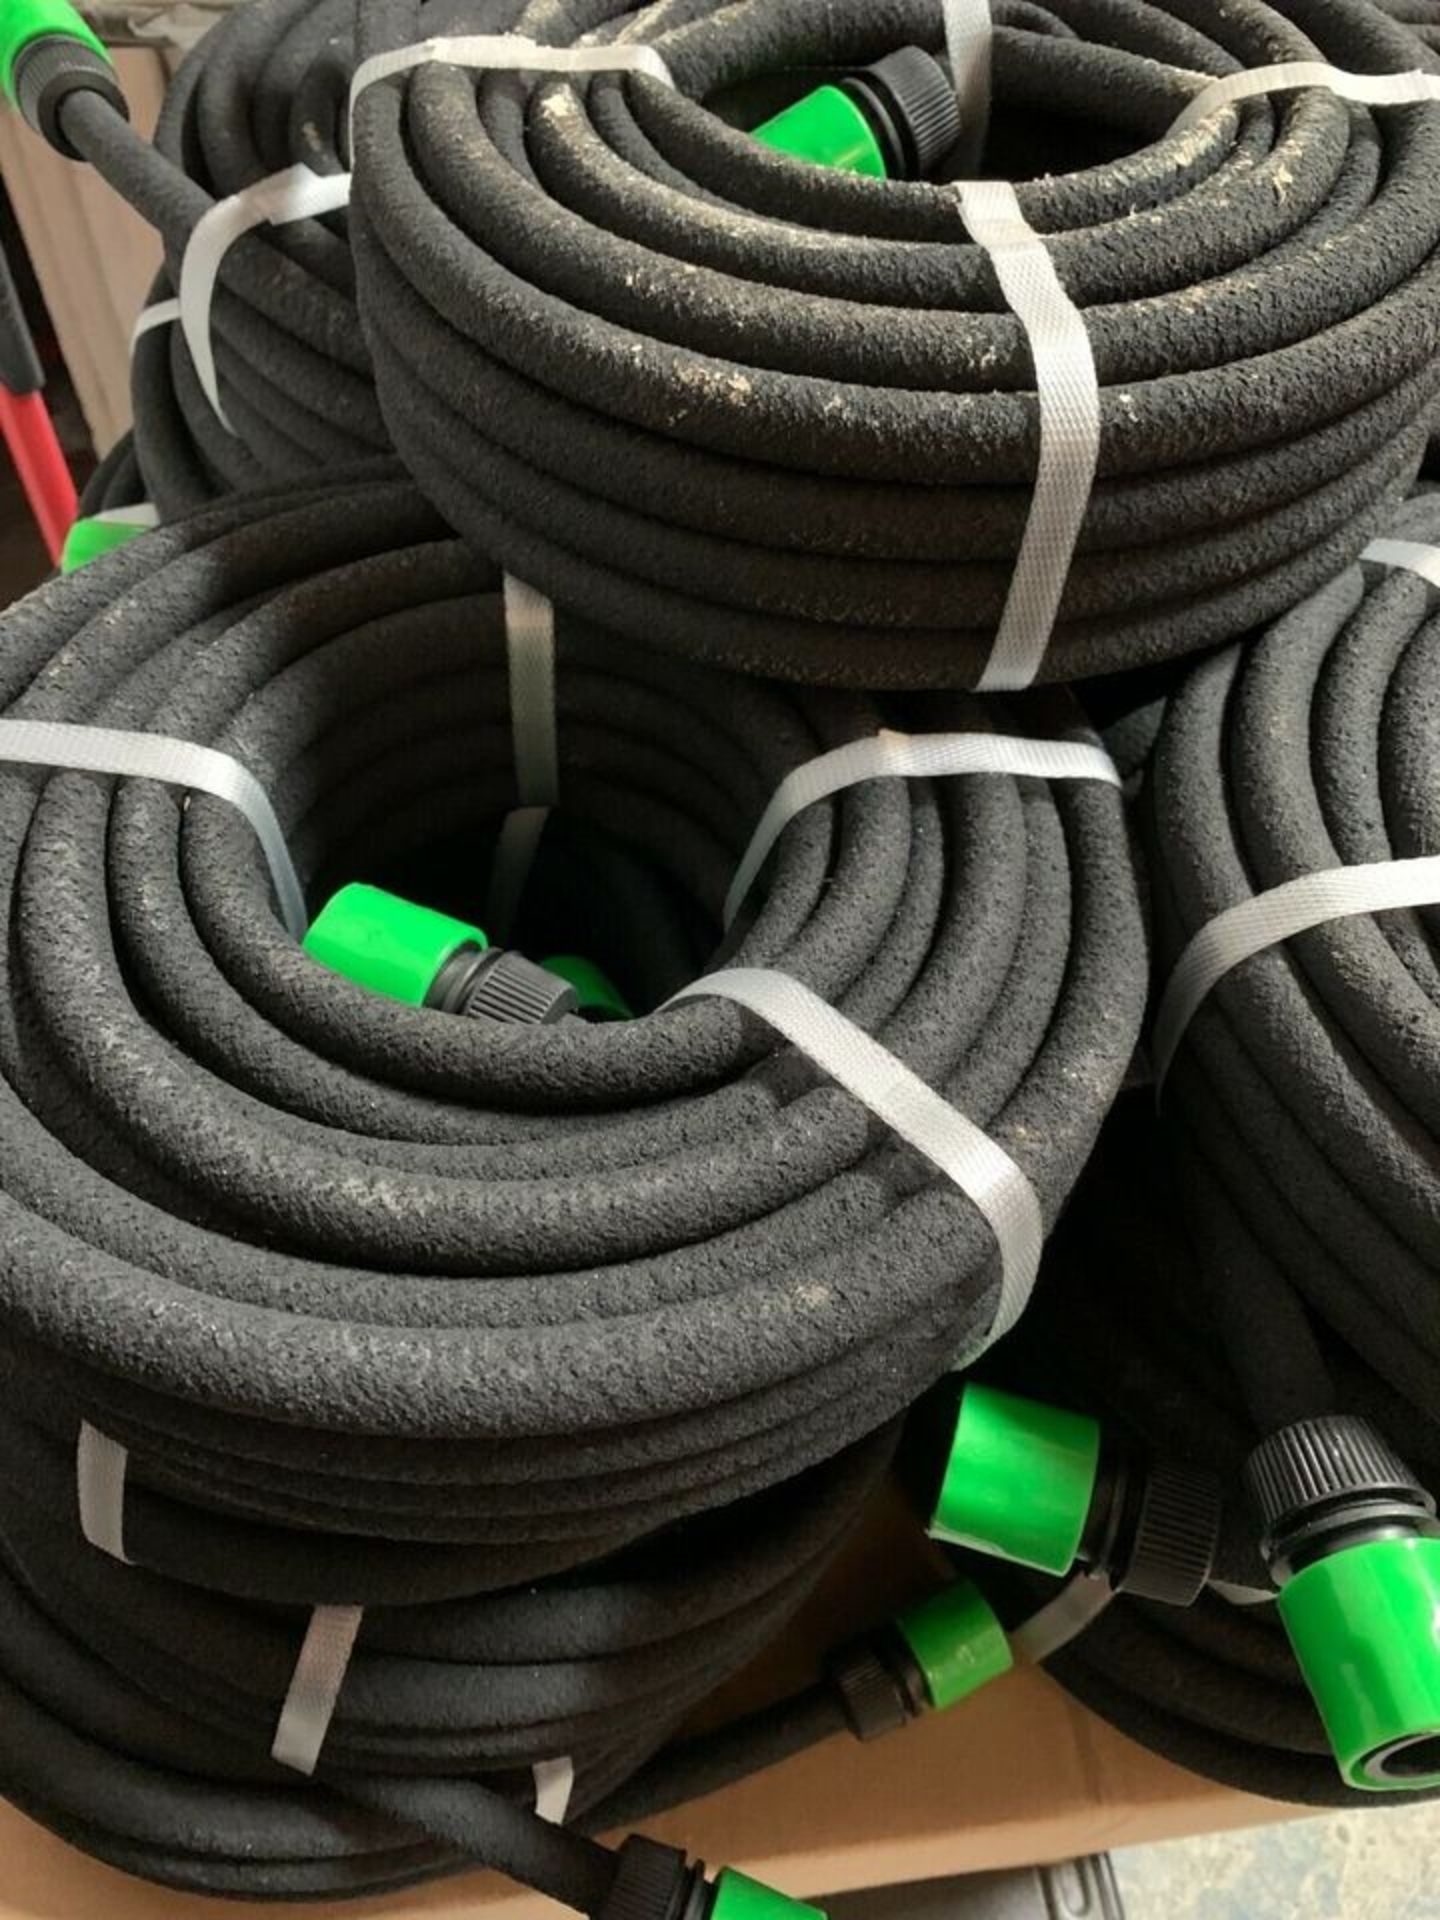 JOBLOT WHOLESALE OF 50 X GARDEN POROUS SOAKER HOSE AUTOMATIC DRIP LEAKY WATERING - Image 2 of 2